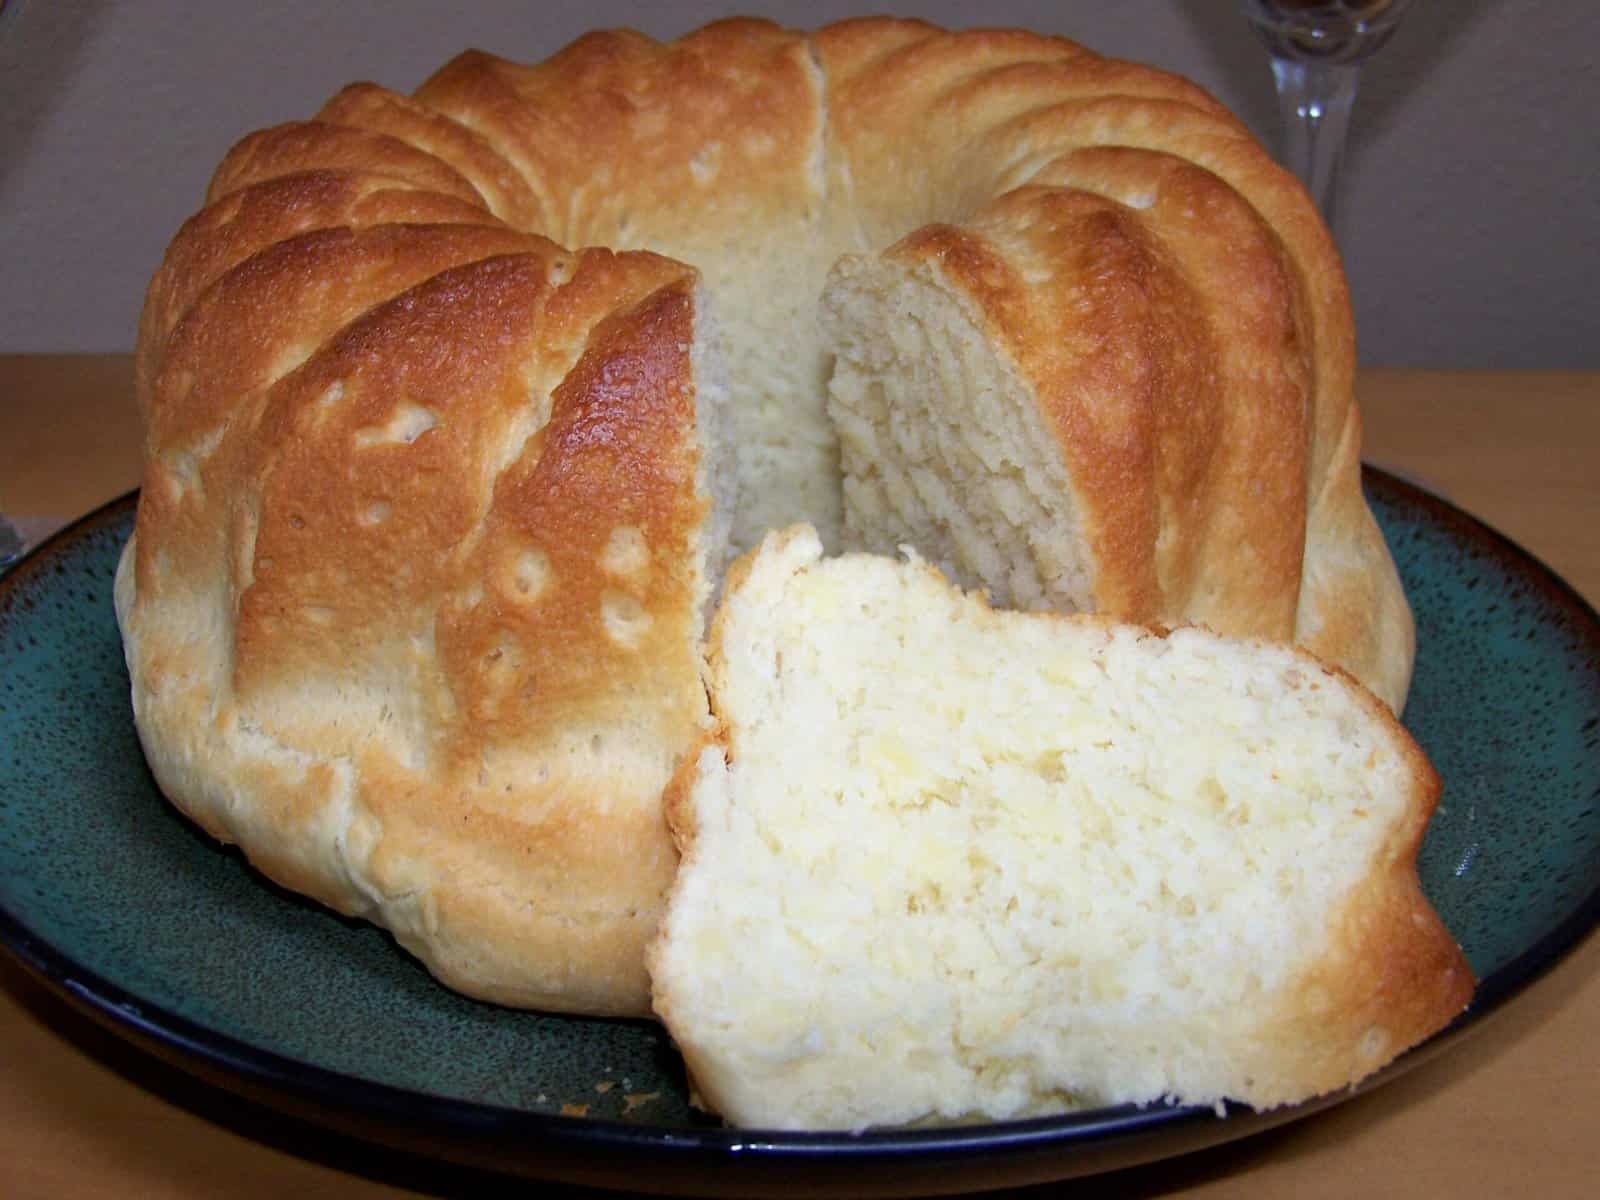  You won't believe how easy it is to make this delicious bread.